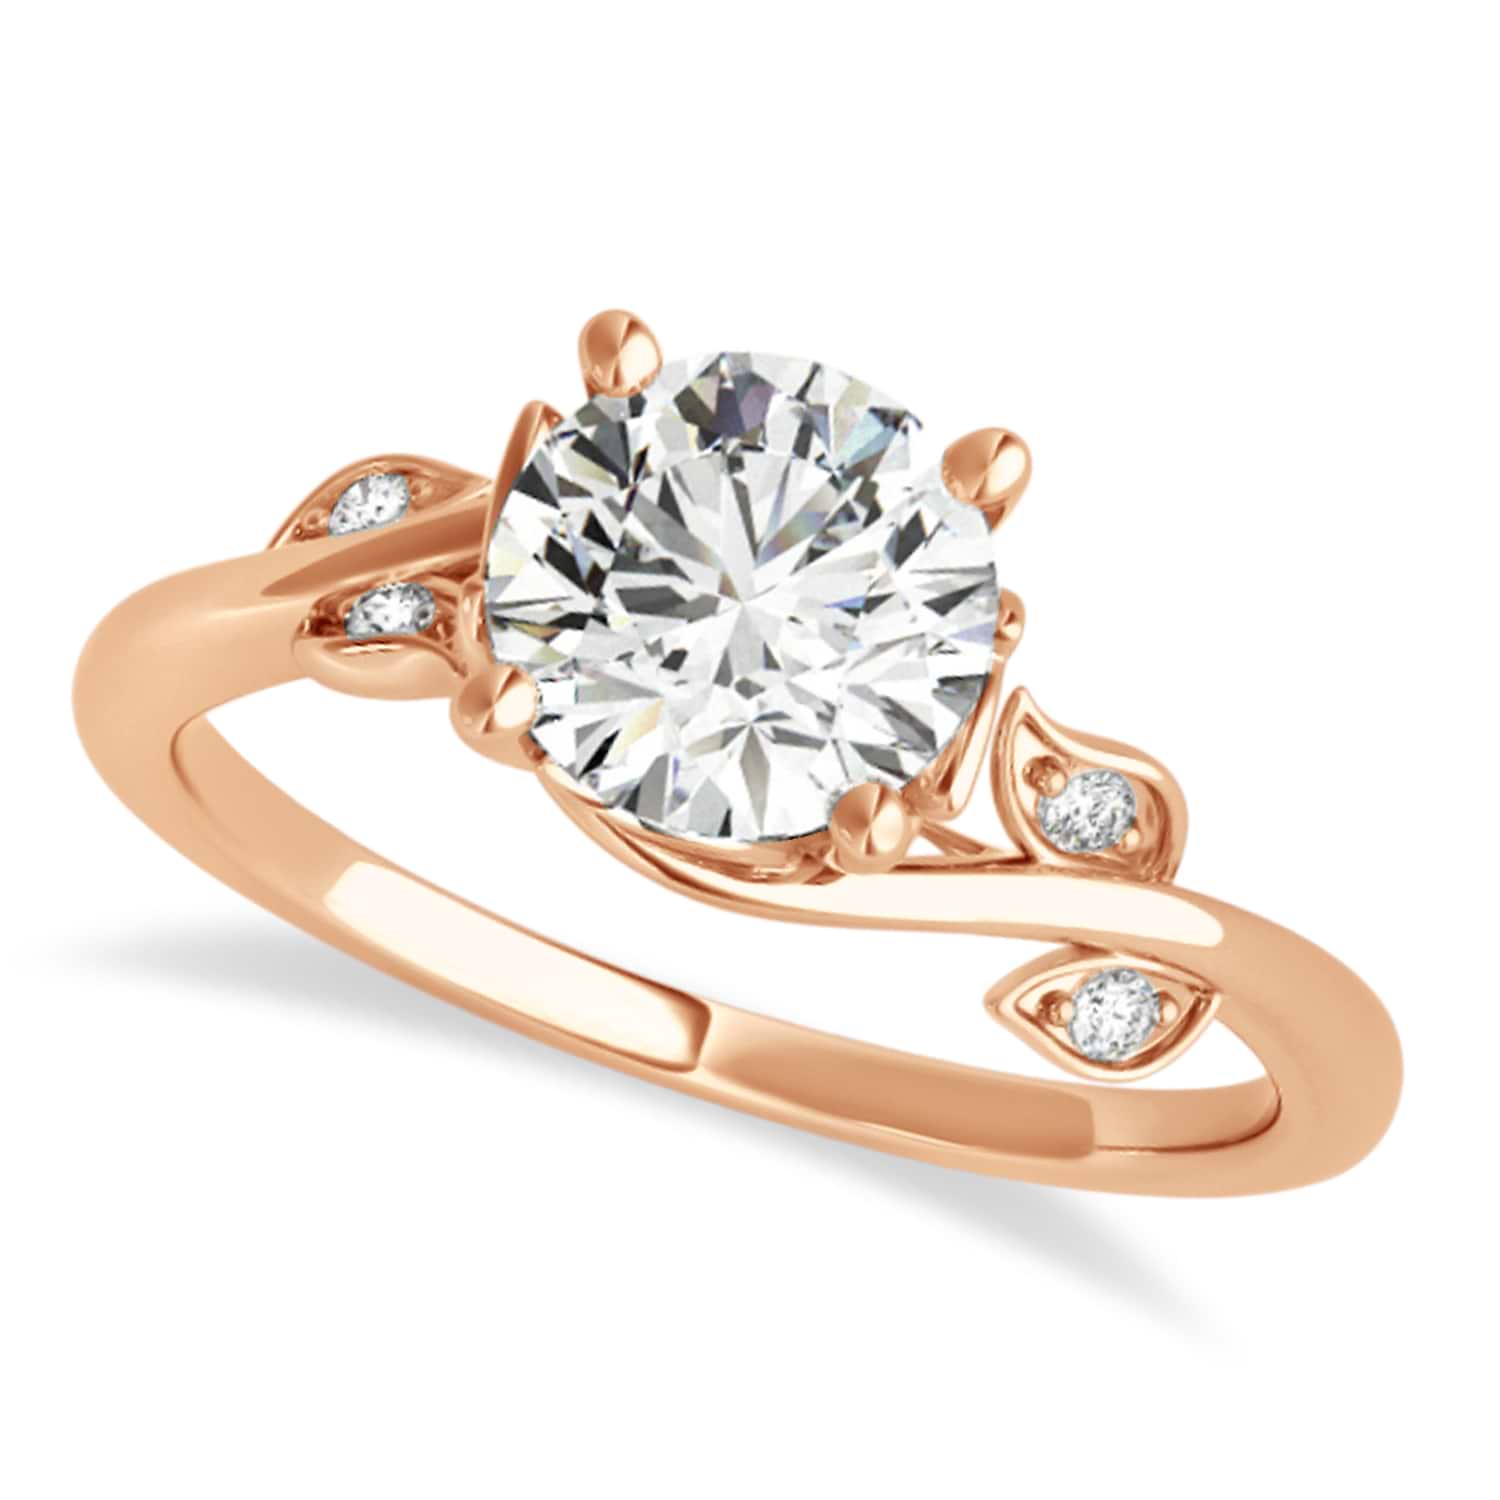 Bypass Floral Diamond Engagement Ring 14k Rose Gold (1.50ct)